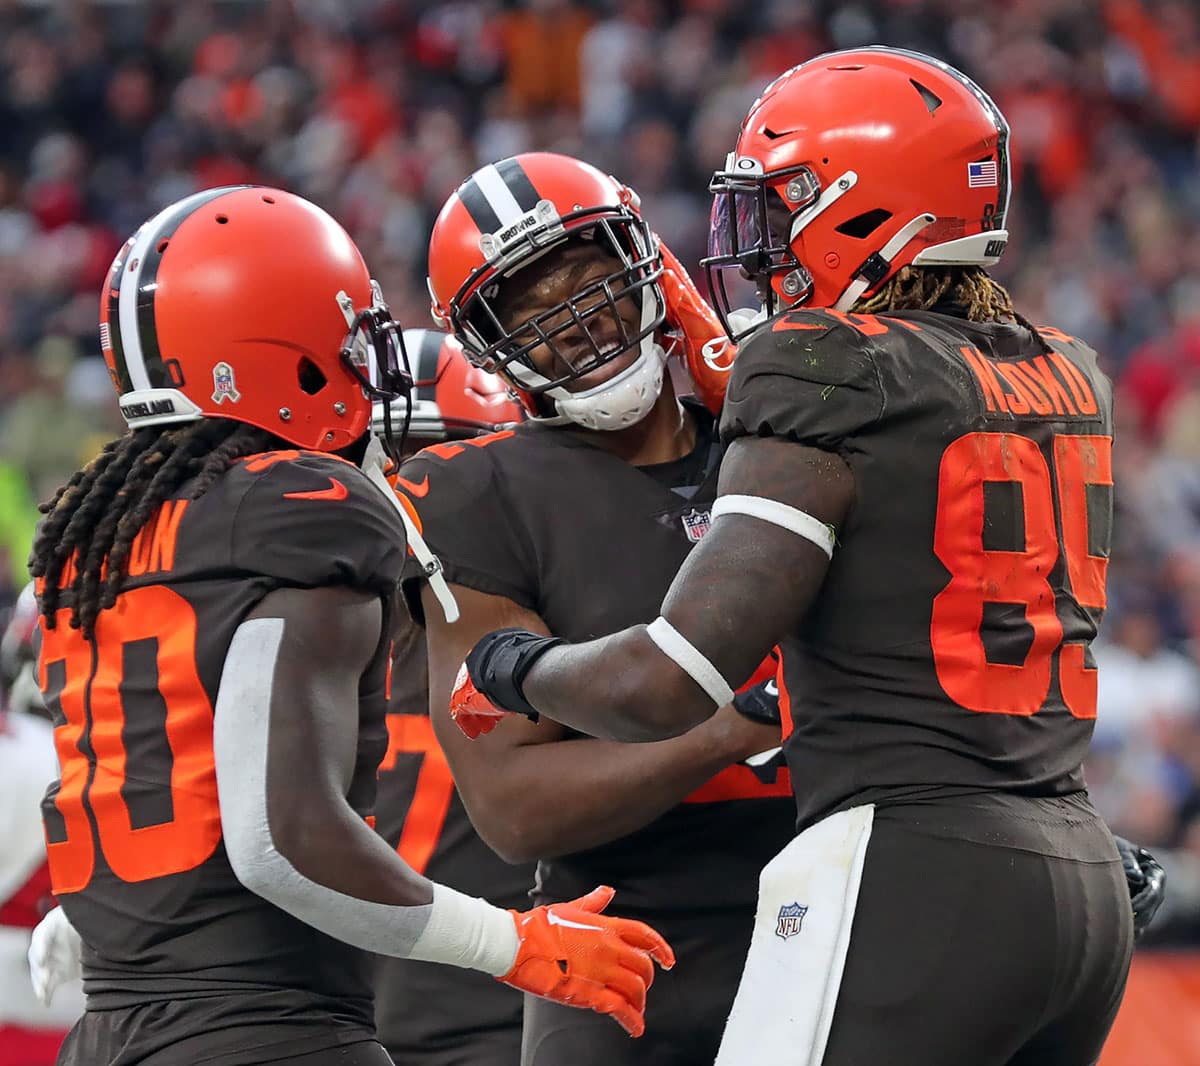 Browns wide receiver Amari Cooper (middle) celebrates with David Njoku (85) after a second-half touchdown against the Buccaneers, Sunday, Nov. 27, 2022, in Cleveland